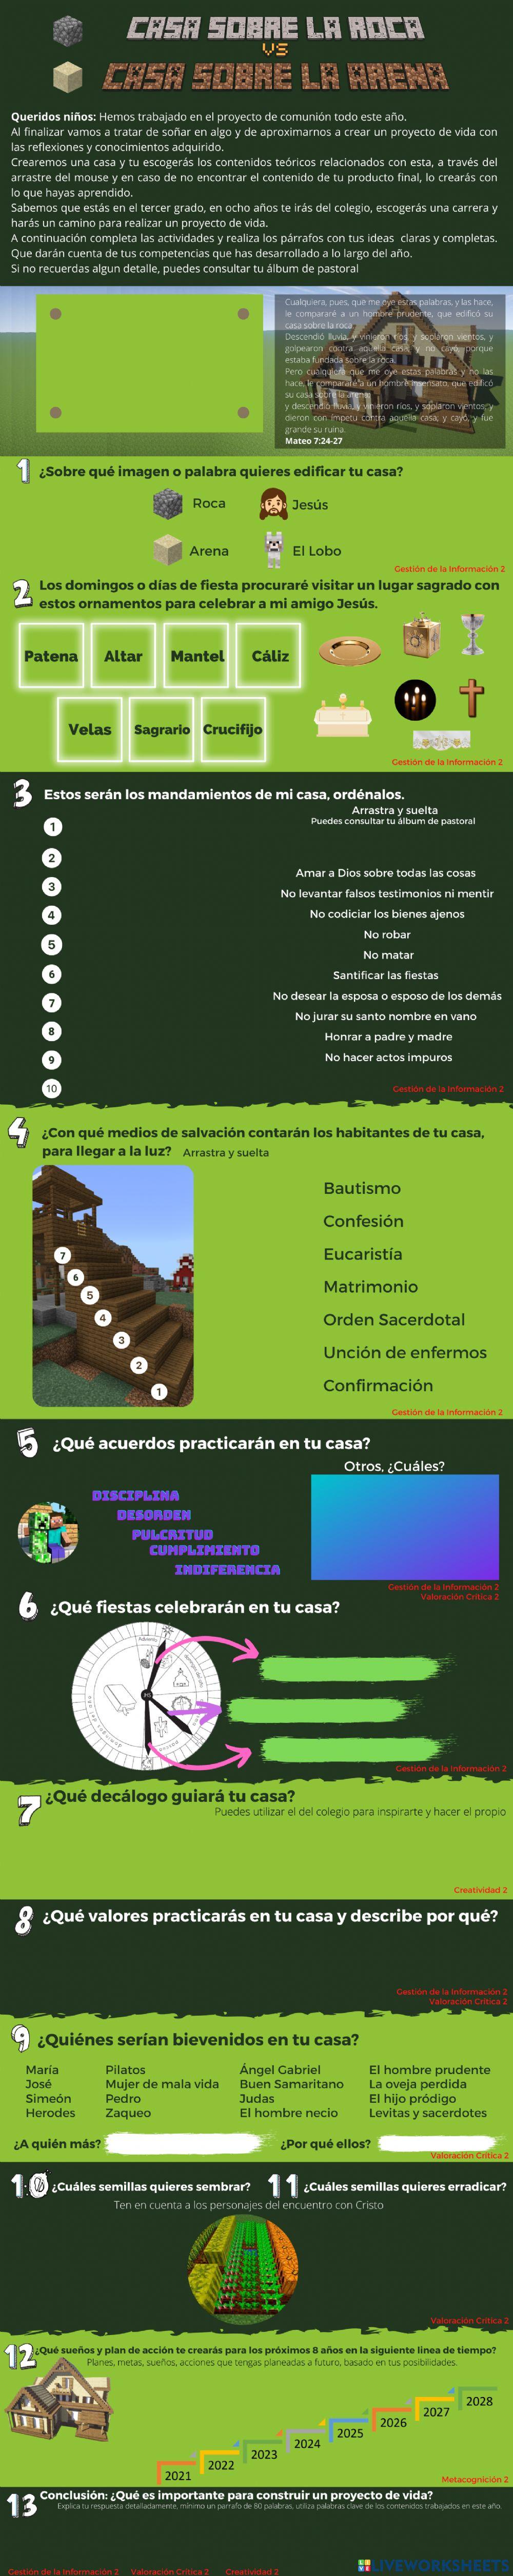 PROYECTO TRIMESTRAL